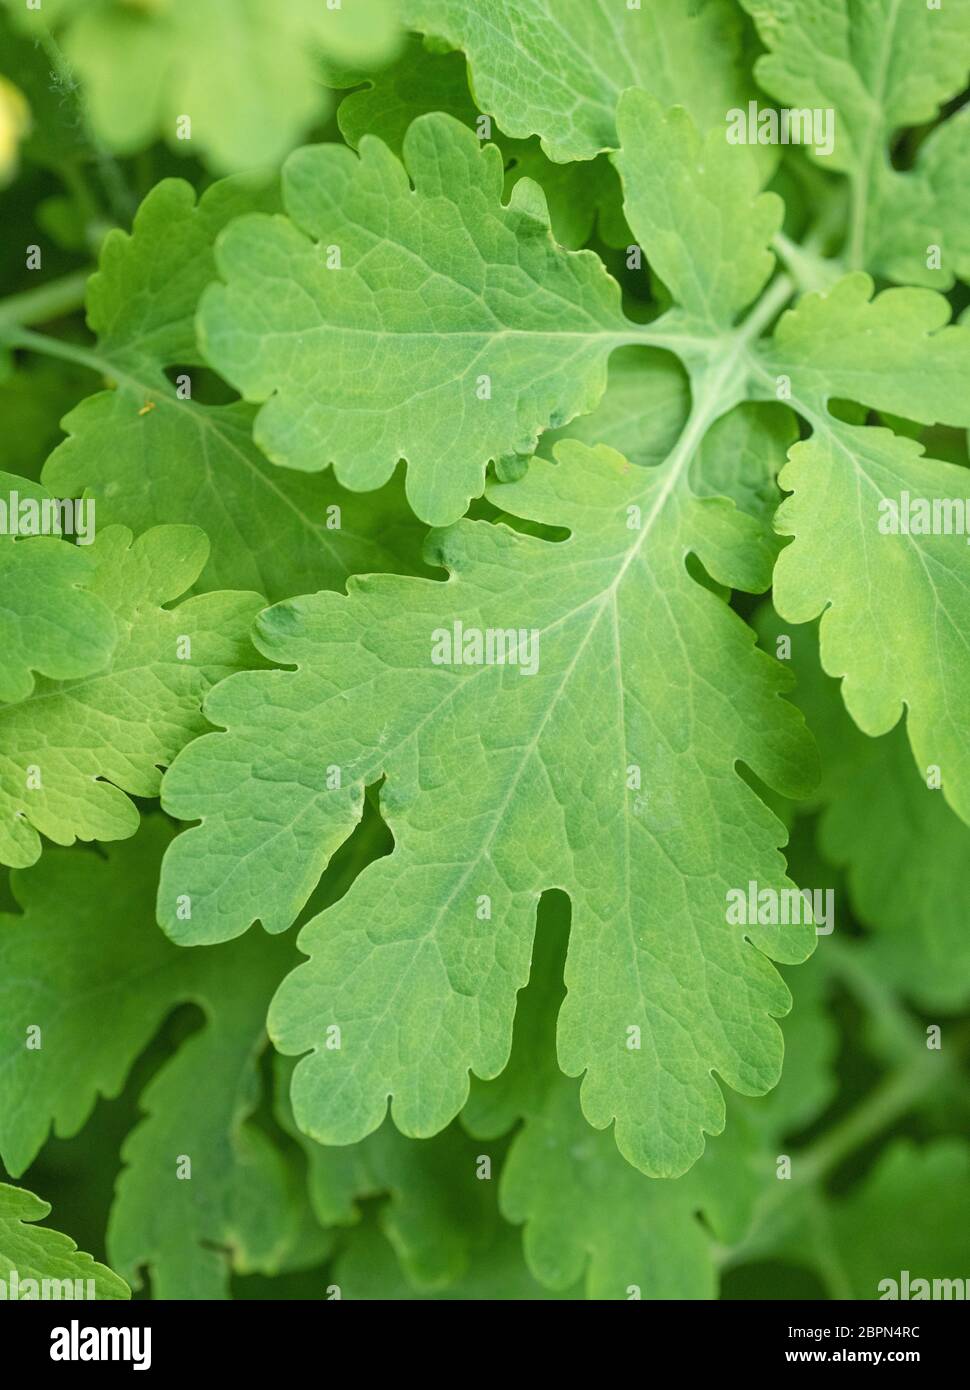 Close shot of leaves of Greater Celandine / Chelidonium majus in shade, & showing distinct leaf margin. Former medicinal plant with vivid yellow sap. Stock Photo